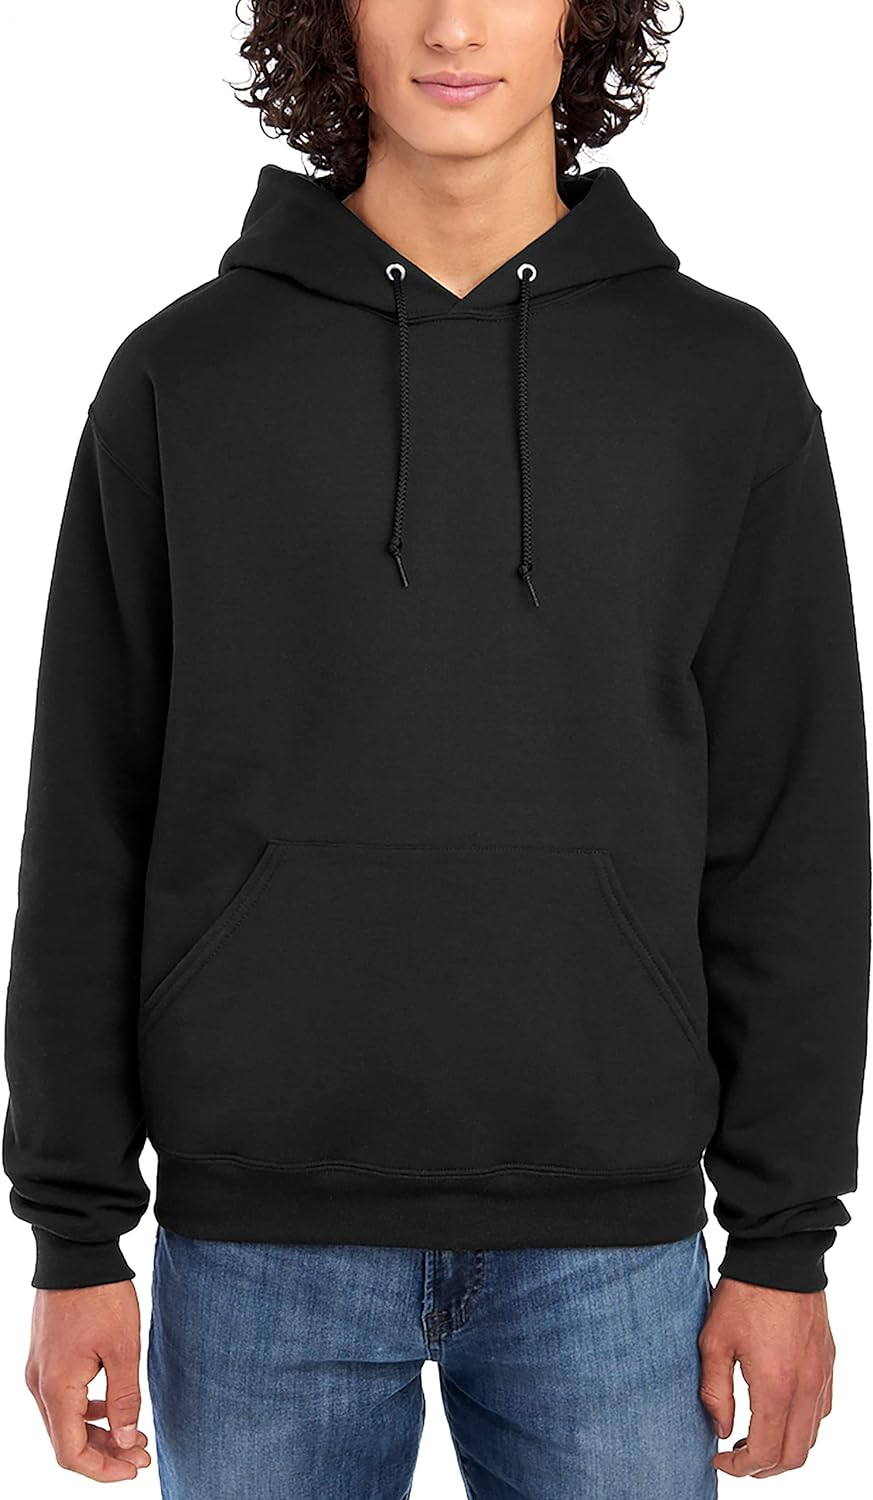 I recently purchased the Jerzees Men's NuBlend Fleece Hoodie from Amazon, and I couldn't be happier with my purchase! These hoodies are a perfect blend of style, comfort, and durability. Here are a few reasons why I highly recommend these hoodies to anyone in search of a cozy and fashionable outerwear:1. Superior Quality: The first thing that struck me about the Jerzees Men's NuBlend Fleece Hoodies is the outstanding quality. The fabric is a soft and thick cotton blend that feels incredibly comfortable against the skin. The stitching is strong and durable, ensuring the hoodie will last through countless wearings and washes. I was impressed by the attention to detail and craftsmanship, making this hoodie worth every penny.2. Cozy Warmth: As the colder months approached, I was in dire need of a reliable hoodie to keep me warm during outdoor activities. The Jerzees Men's NuBlend Fleece Hoodie exceeded my expectations! The fleece lining inside provides exceptional insulation while preserving breathability. Whether I'm going for a walk or lounging at home, this hoodie keeps me snug and cozy without overheating.3. Versatile Design: I appreciate the timeless design of these hoodies as they effortlessly blend with a variety of casual outfits. The hood is generously sized and features an adjustable drawstring for a perfect fit. The ribbed cuffs and waistband contribute to a sleek and tailored appearance, while the kangaroo pocket adds functionality and style. Whether I'm running errands or hanging out with friends, this hoodie proves to be both fashionable and practical.4. Wide Size Range: It's worth mentioning that Jerzees offers this hoodie in sizes S-3X, ensuring that everyone can find their perfect fit. I was pleased to find that the sizing chart was accurate, allowing me to order the size that fit me perfectly. The ample range of sizes is a definite plus, ensuring that anyone can enjoy the comfort and style of the Jerzees Men's NuBlend Fleece Hoodies.5. Affordable Price: Lastly, the price point of these hoodies is exceptional considering the quality you're getting. Jerzees has managed to offer an affordable option without compromising on comfort or durability. It's refreshing to find a product that offers such great value for money.In conclusion, I wholeheartedly recommend the Jerzees Men's NuBlend Fleece Hoodies & Sweatshirts to anyone in need of a stylish and cozy outerwear option. From its outstanding quality and cozy warmth to its versatile design and affordable price, this hoodie ticks all the boxes. I'm incredibly satisfied with my purchase and will definitely be buying more in different colors. Way to go, Jerzees and Amazon!Disclaimer: I received no compensation for this review. I genuinely love this product and wanted to share my positive experience.